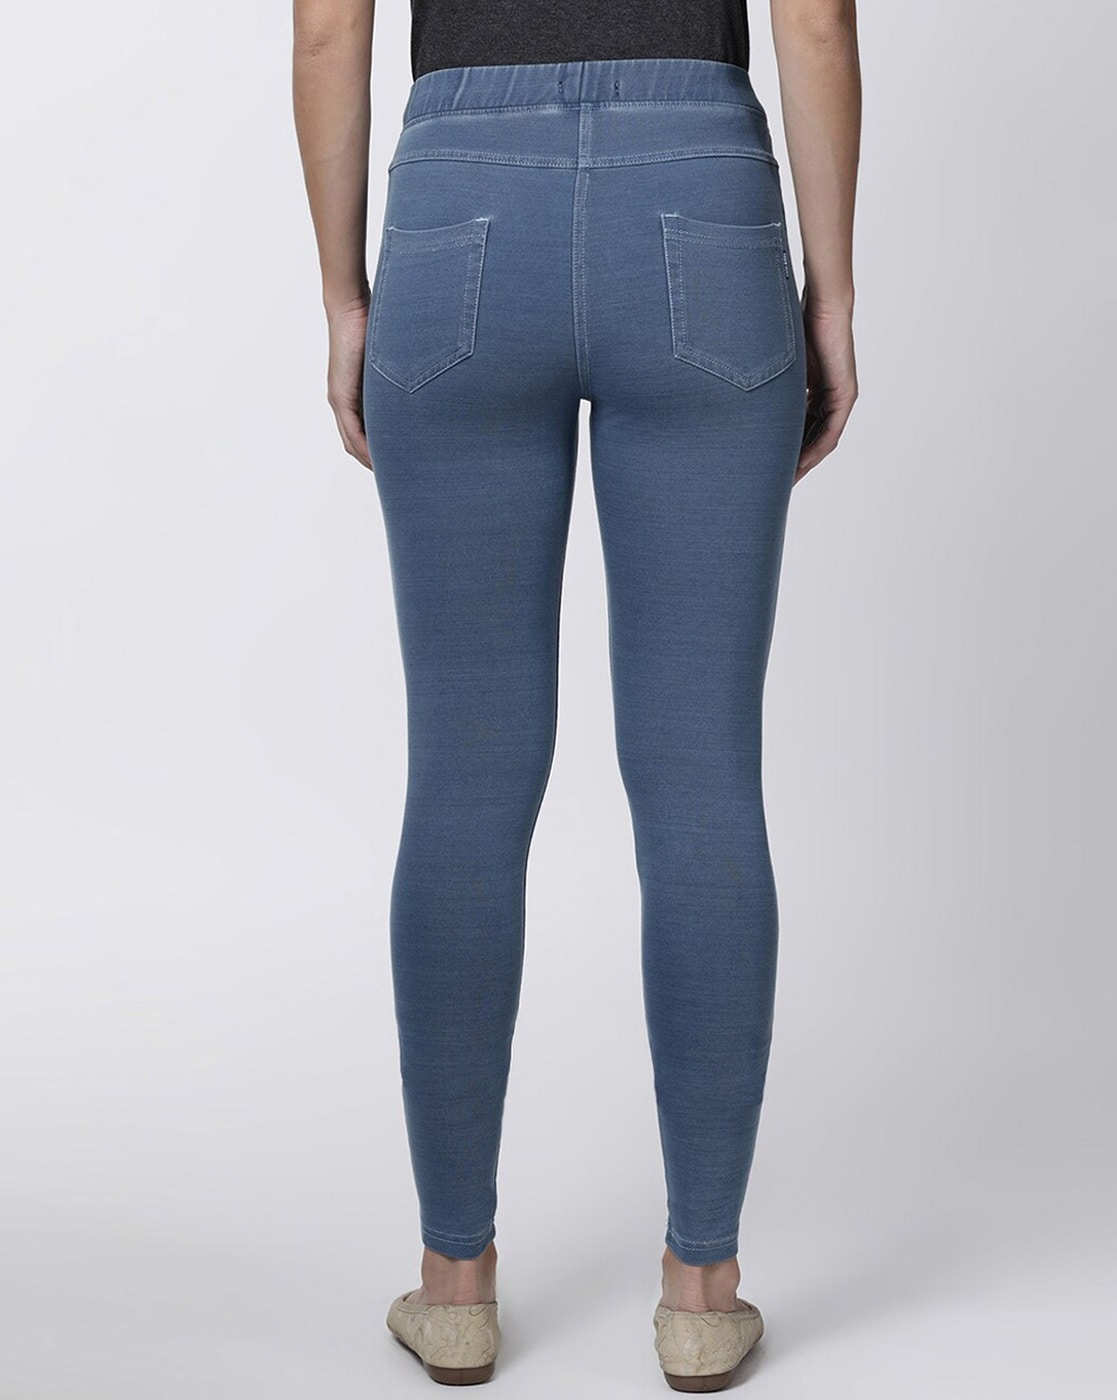 Introducing Denim Jeggings from TWIN BIRDS. Now Available